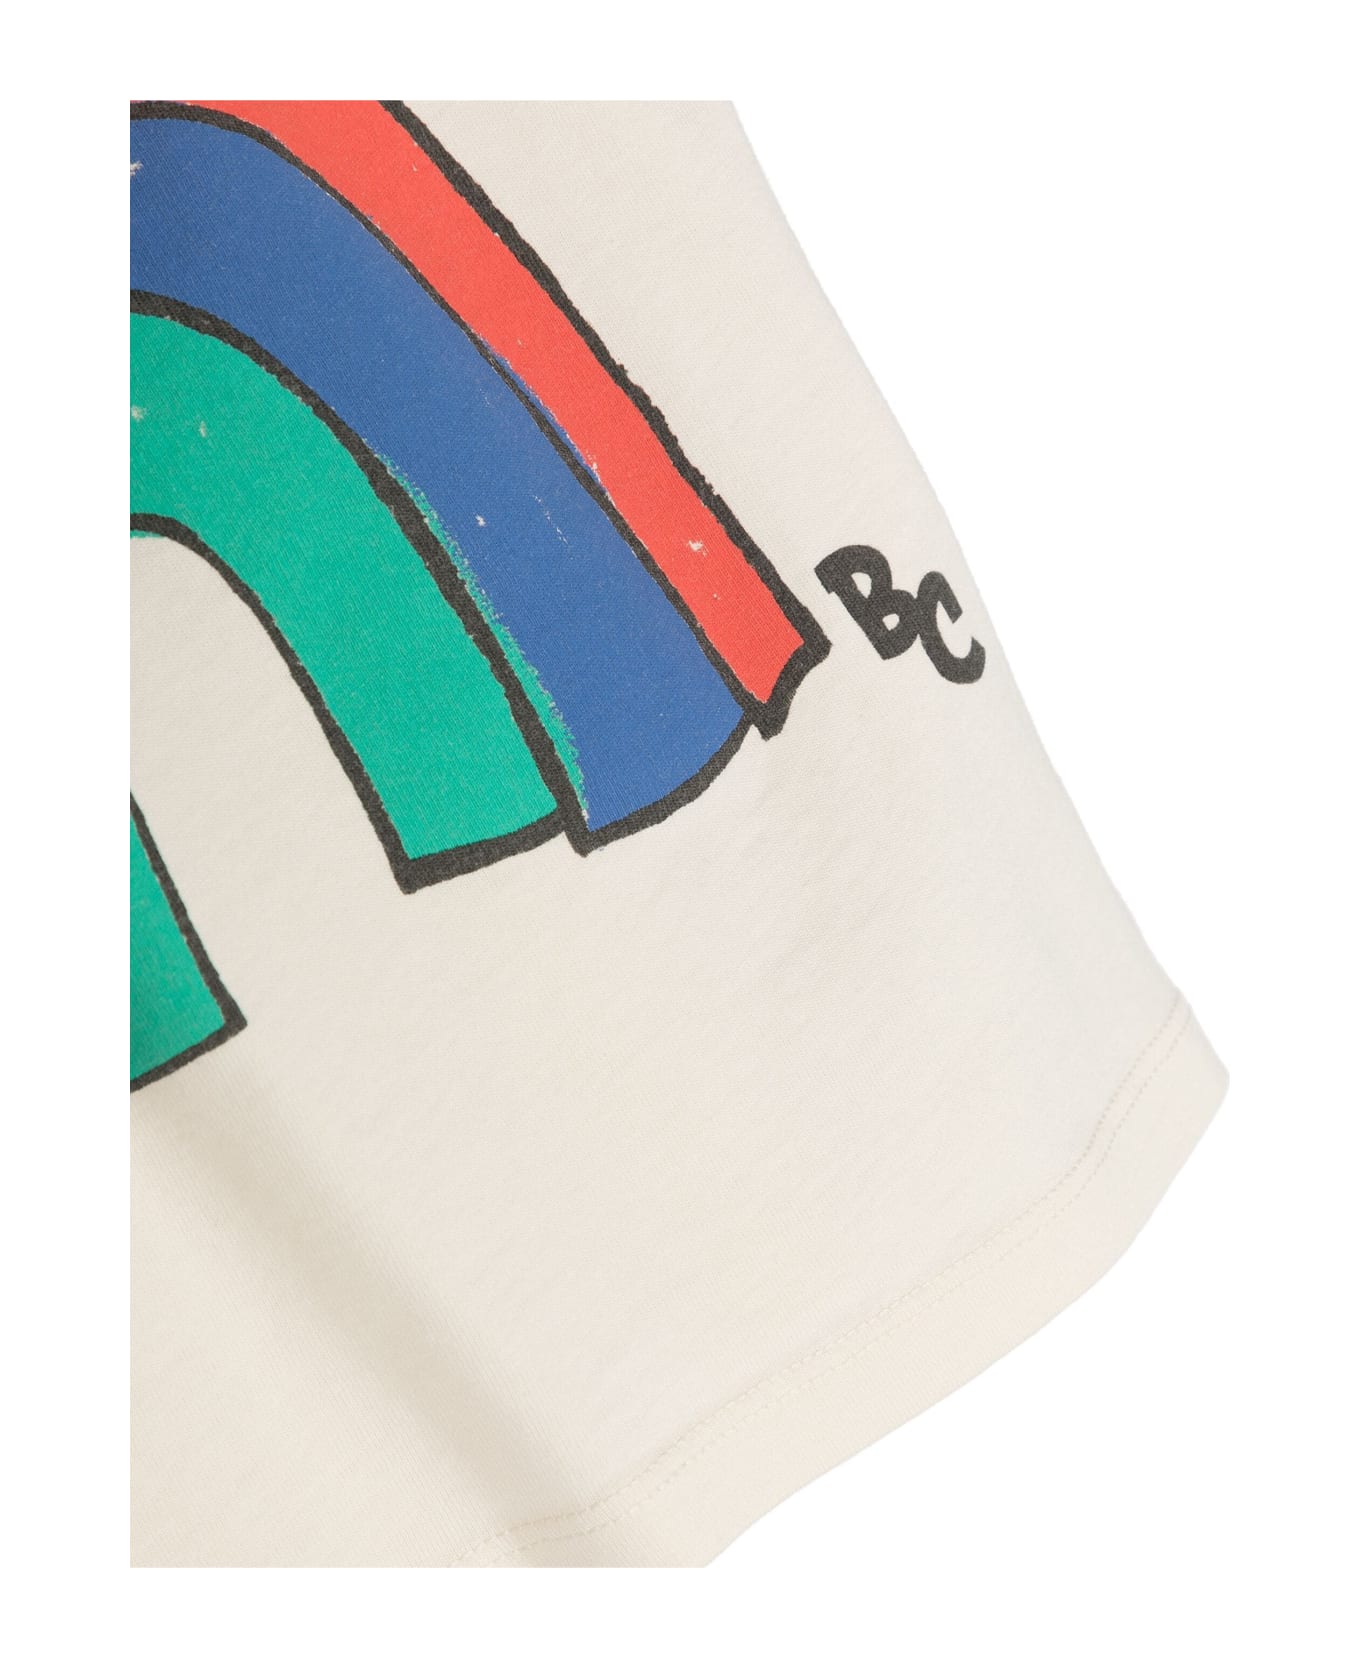 Bobo Choses Ivory Tank Top For Baby Boy With Rainbow Print - Ivory